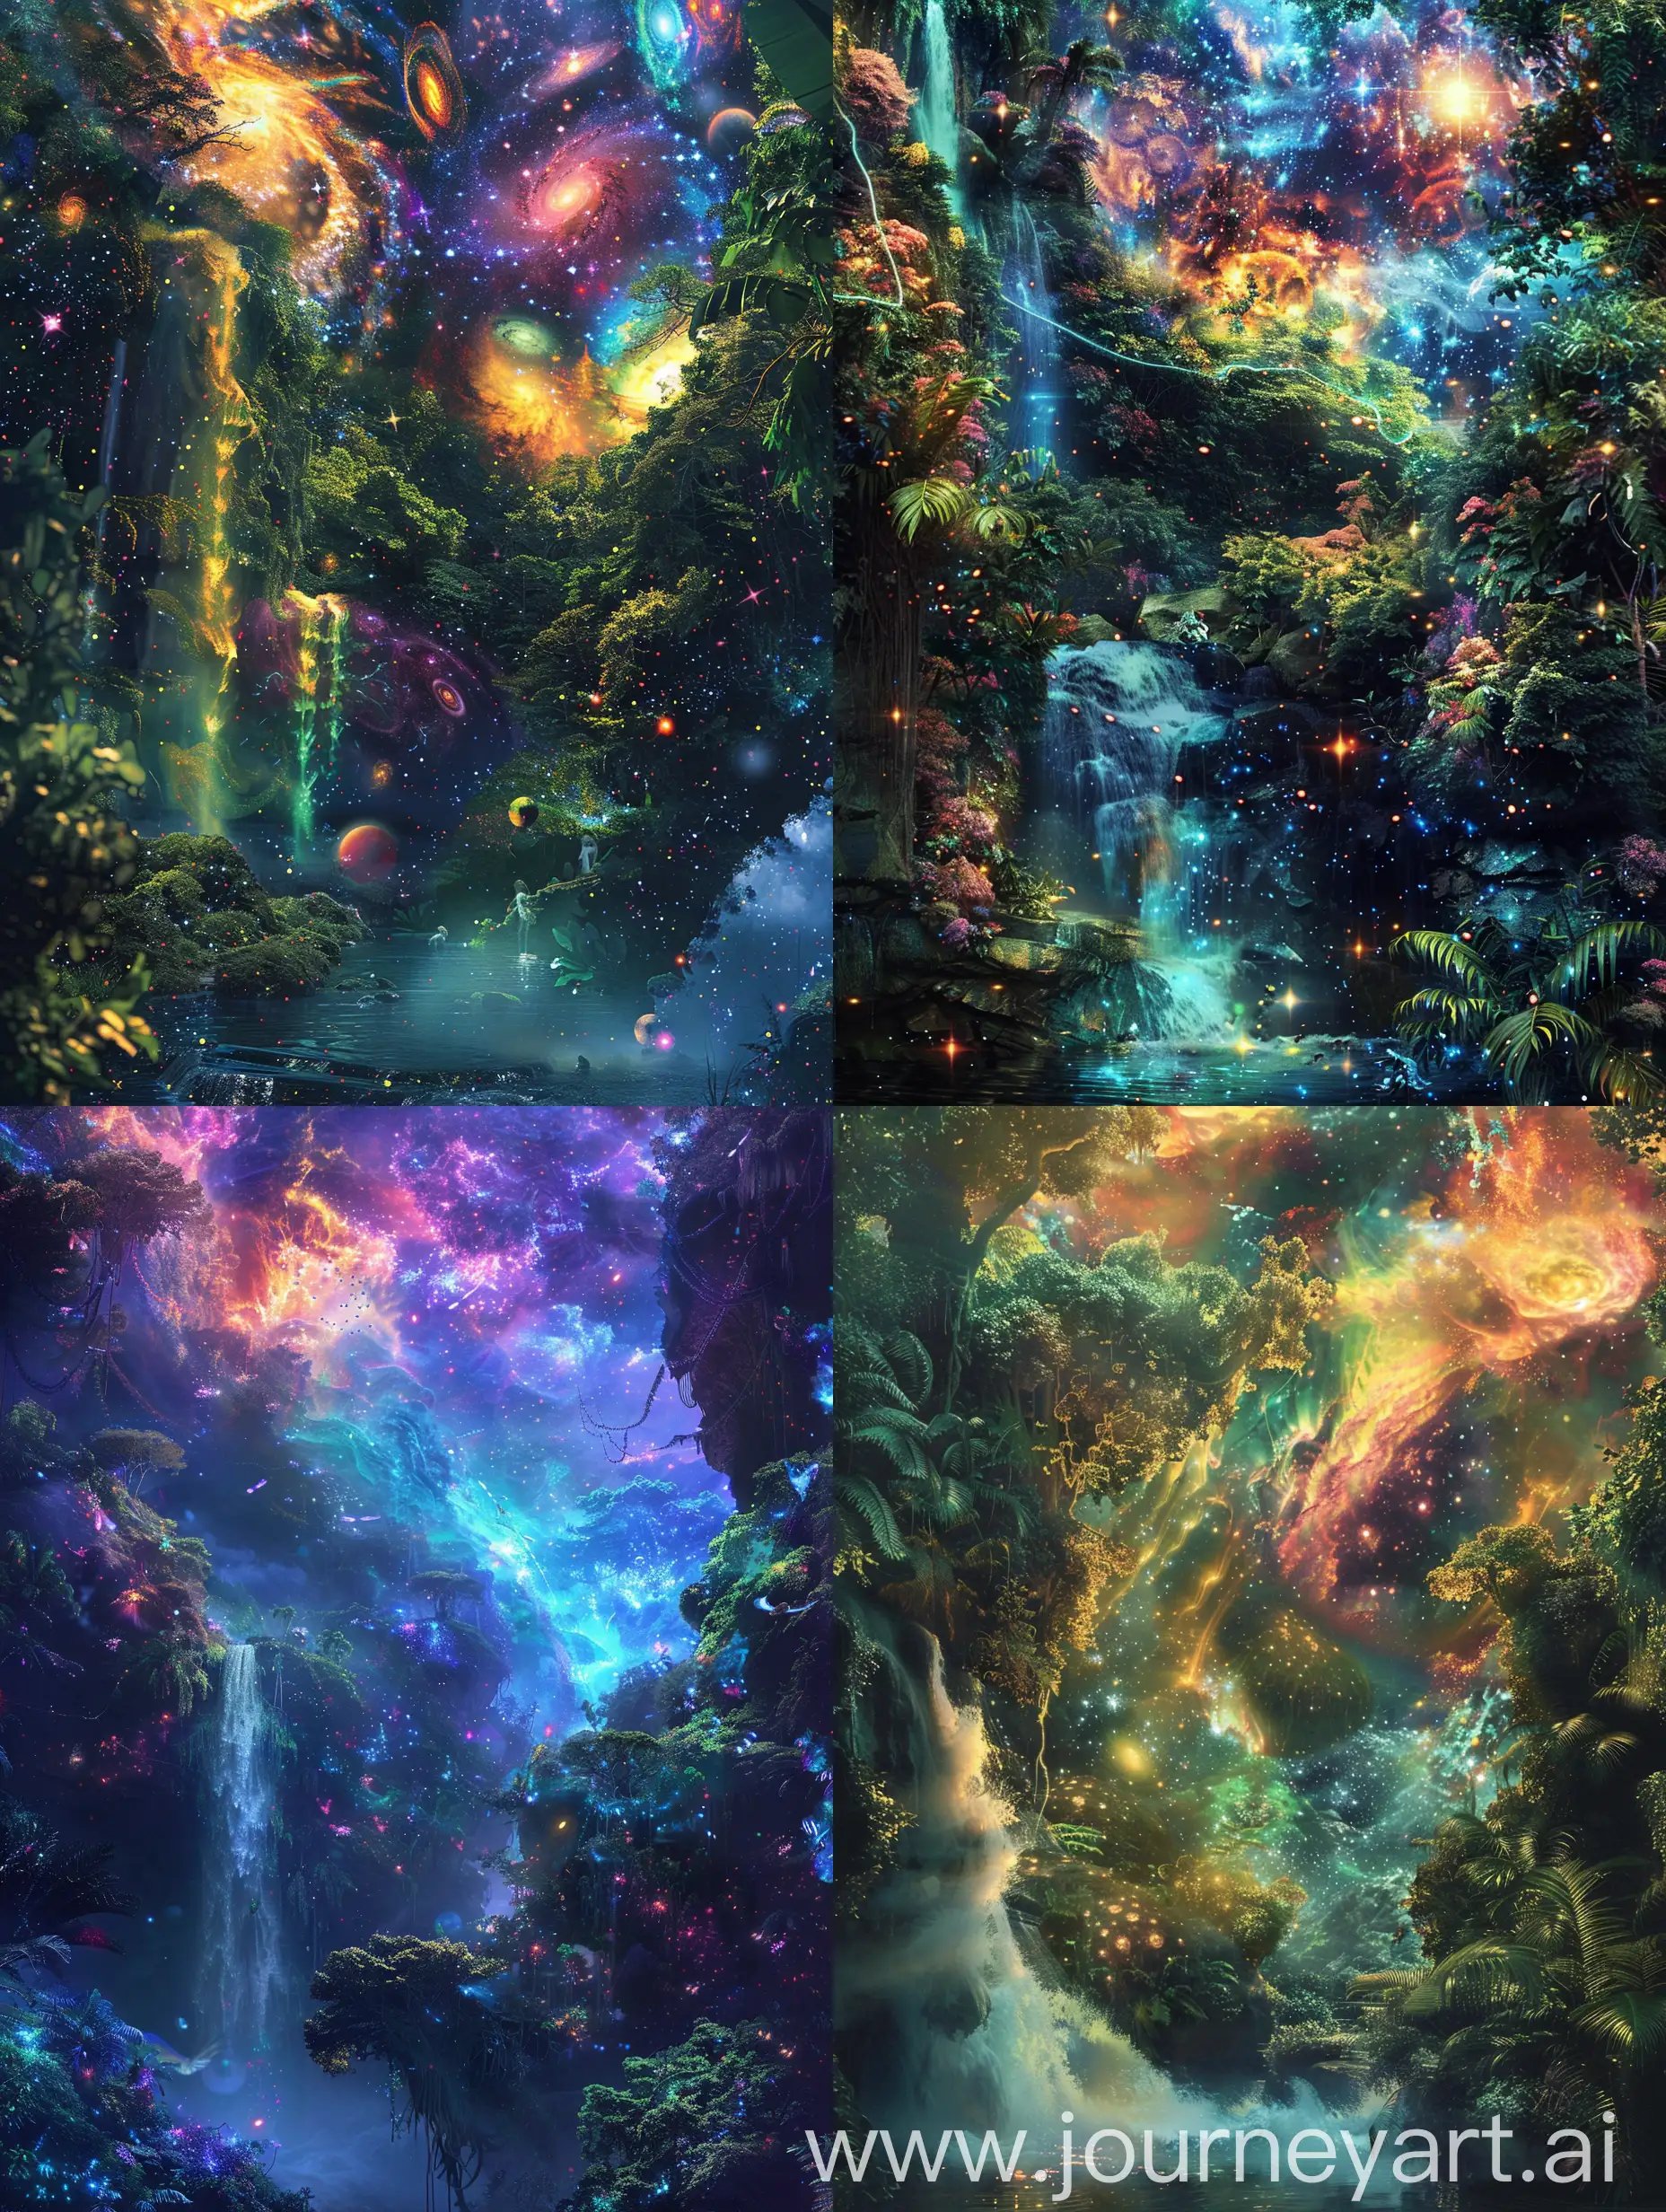 Dark forest jungle with moutions in water fall with galxy exploring an abstract universe filled with vibrant, nebulous formations, exuding a sense of joy